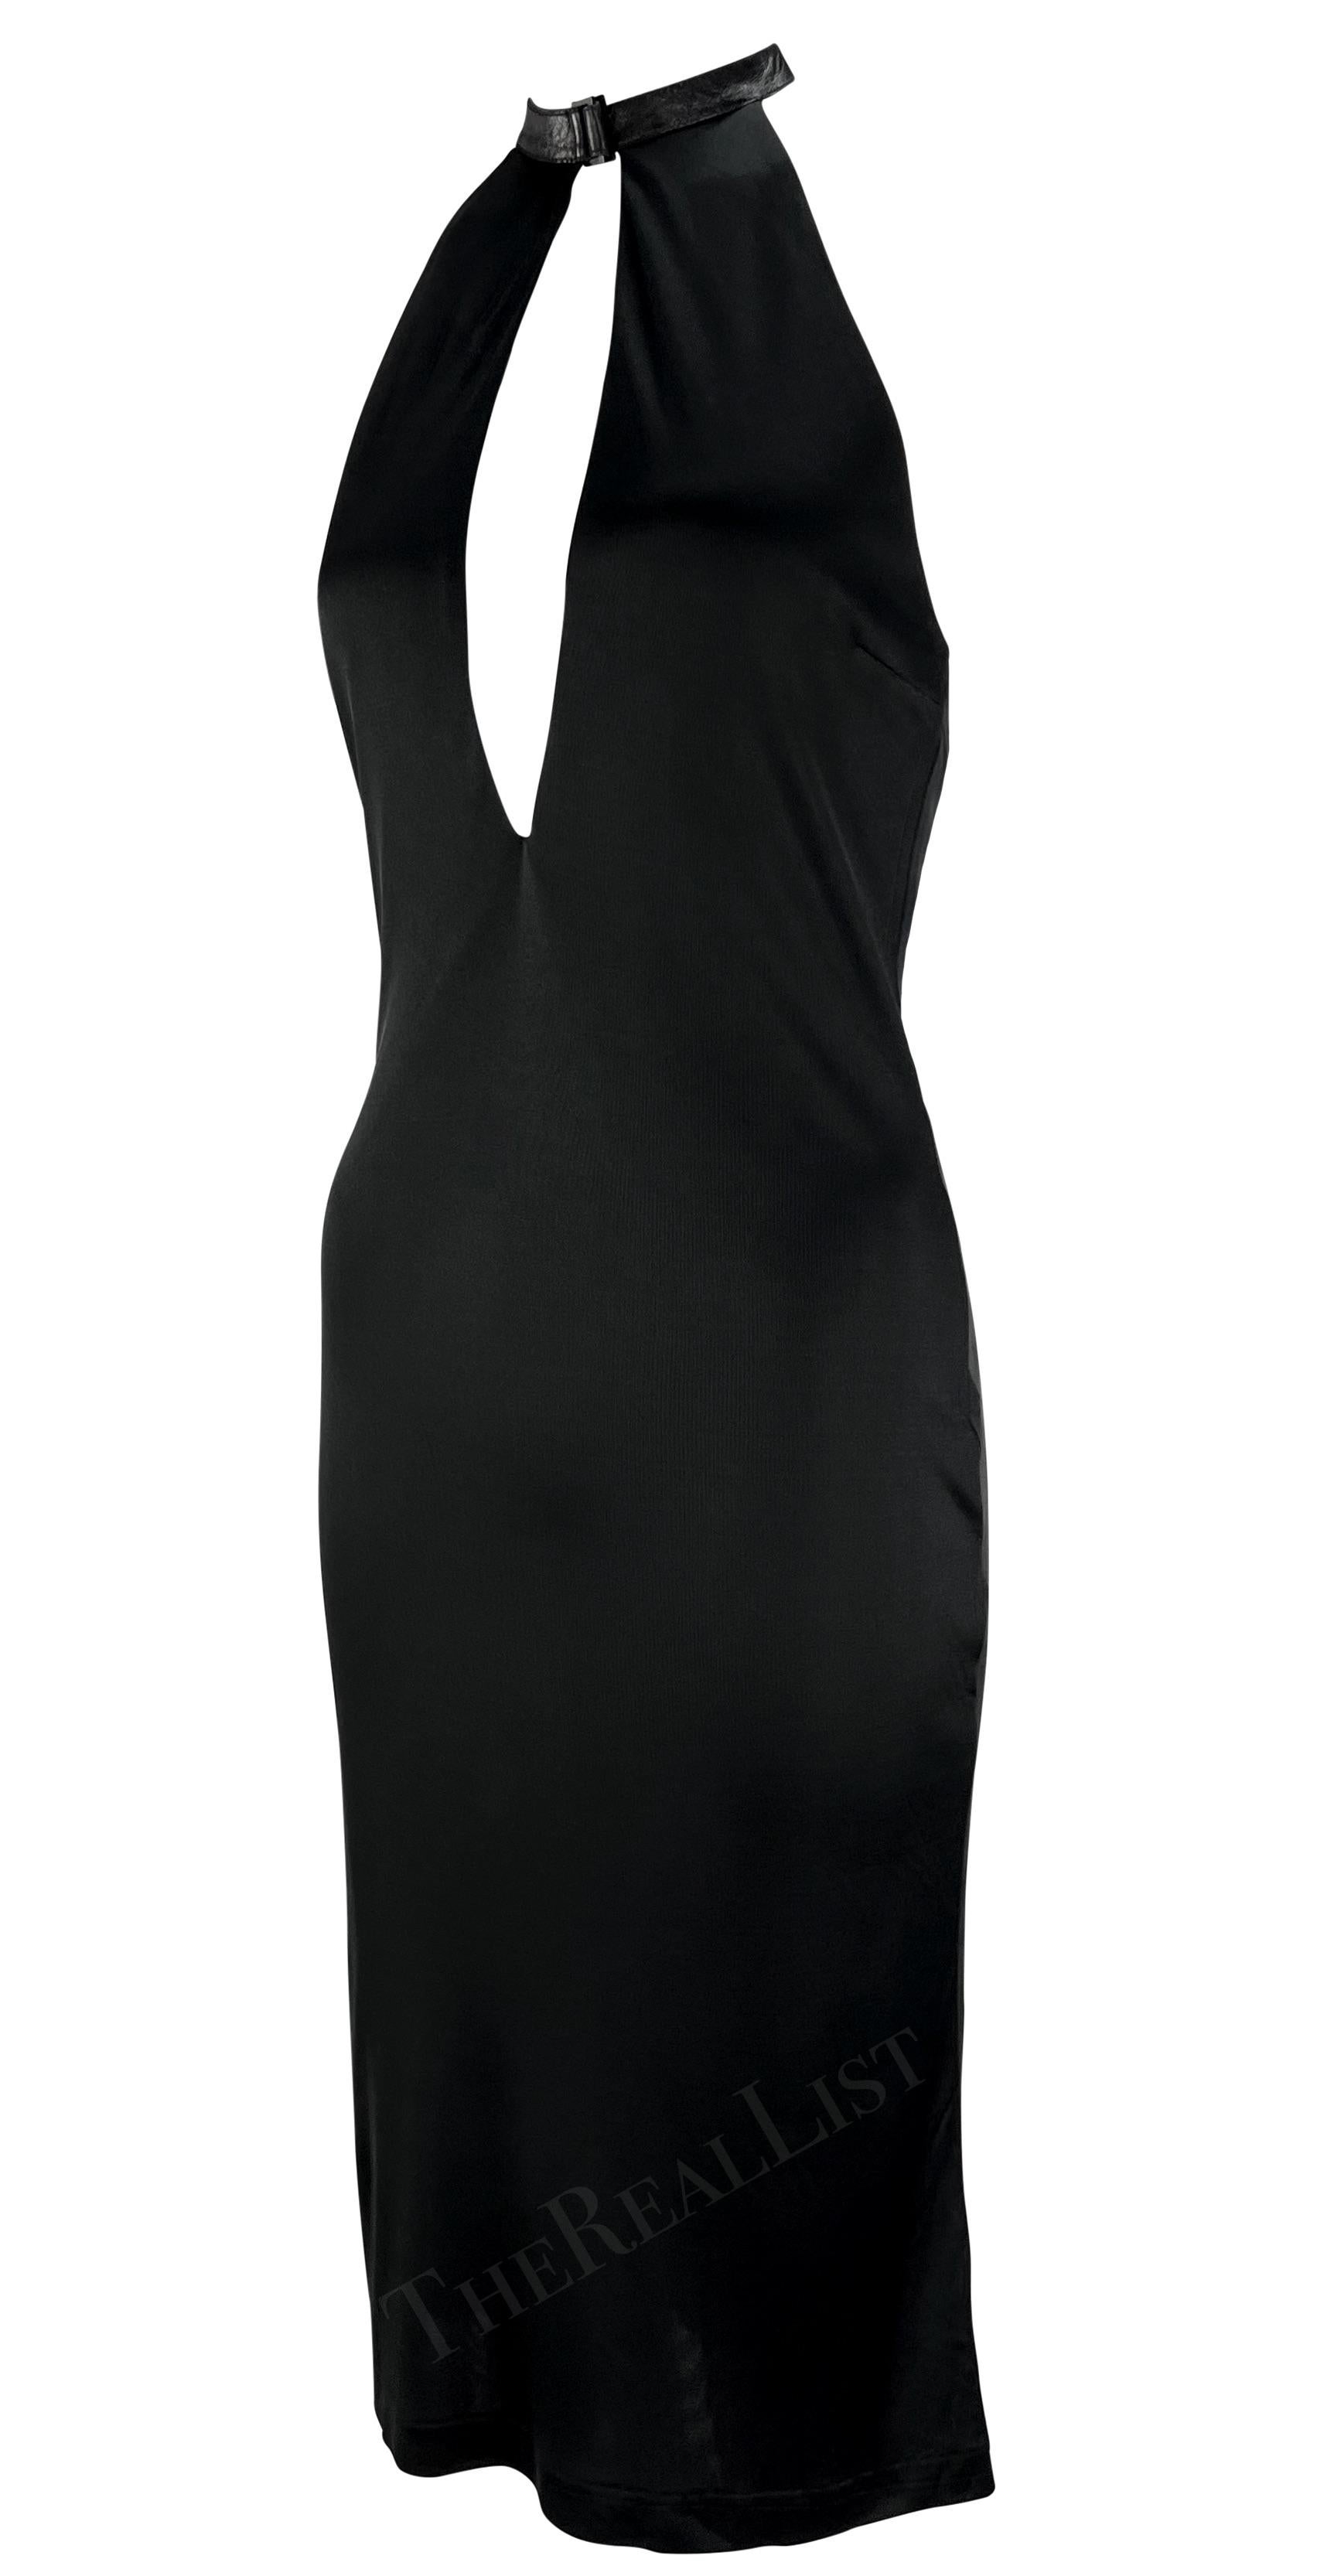 S/S 2001 Gucci by Tom Ford Black Leather Halter Strap Plunging Backless Dress In Excellent Condition For Sale In West Hollywood, CA